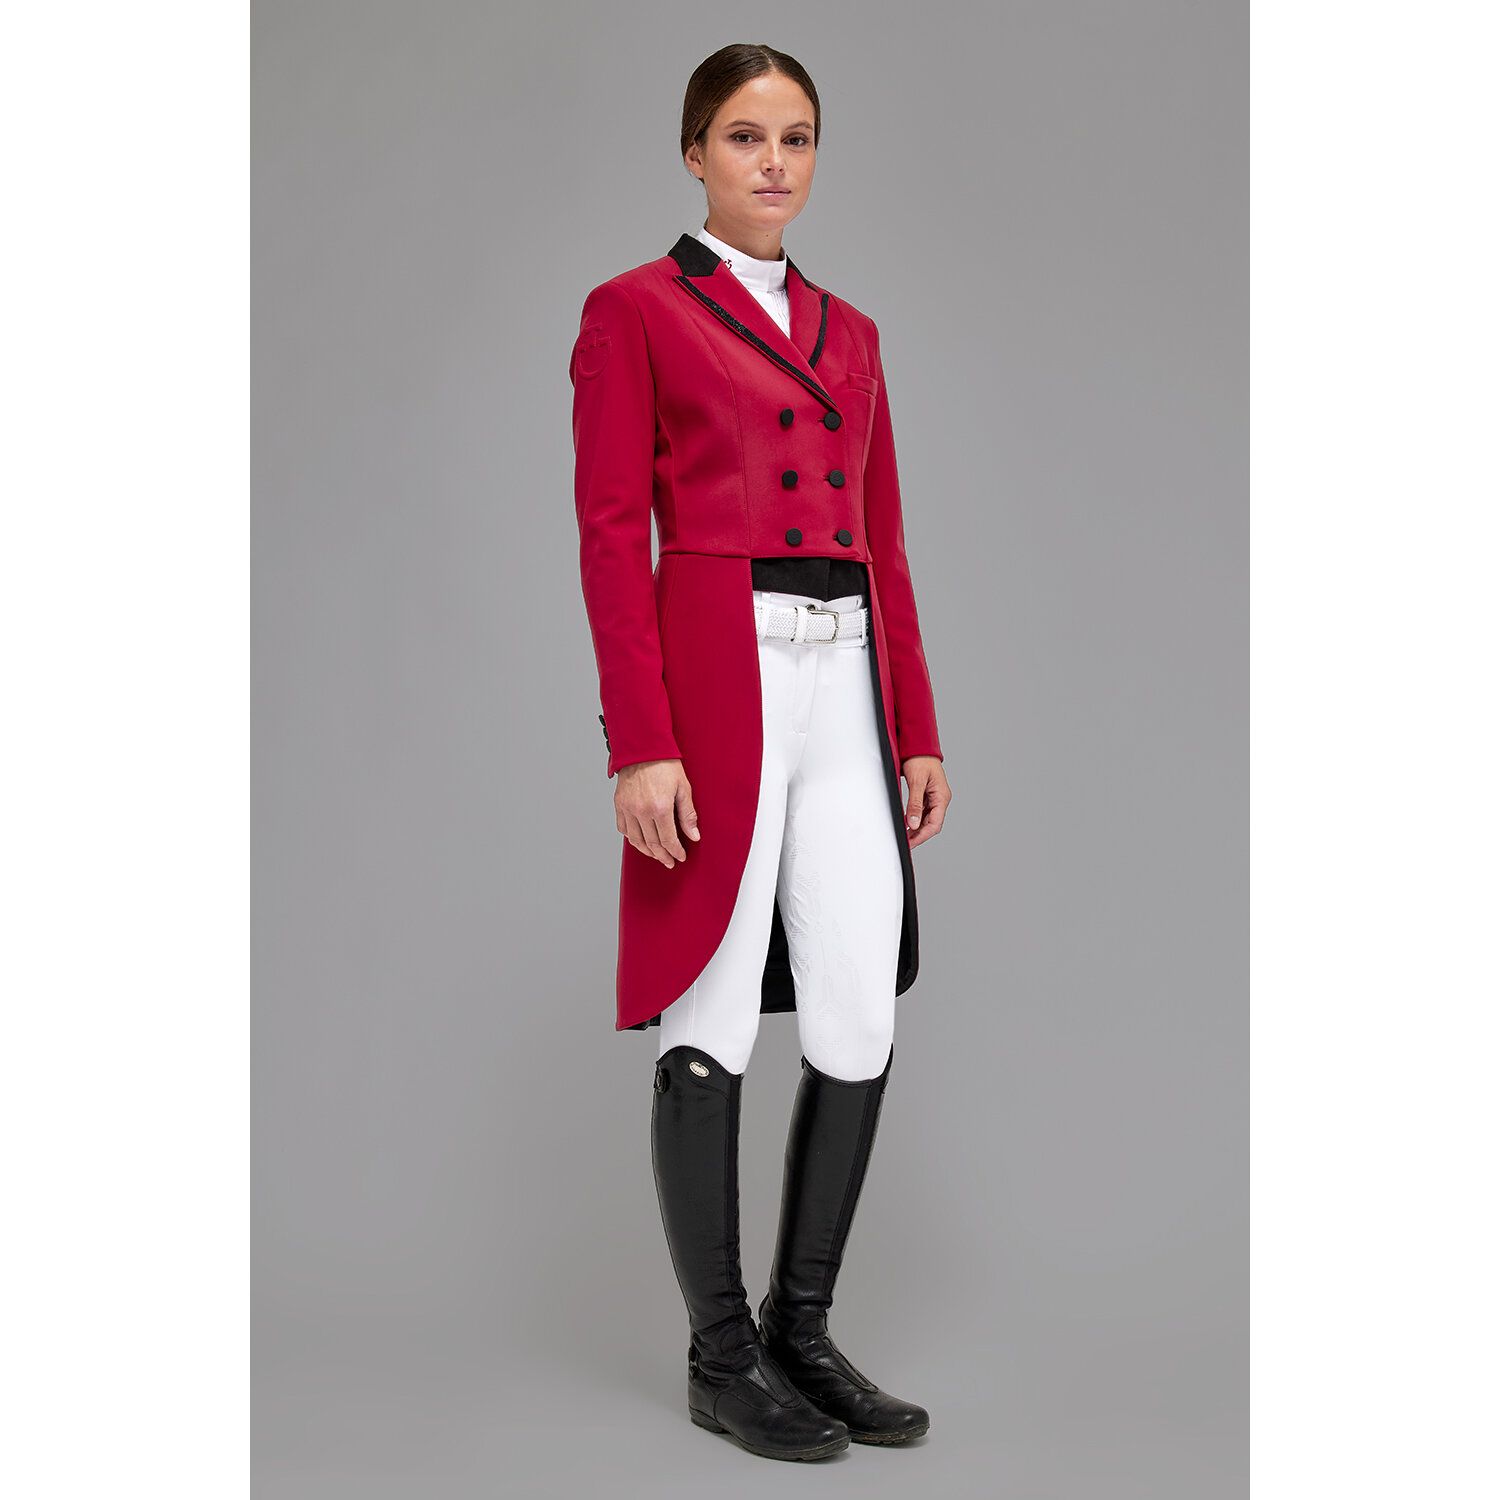 Cavalleria Toscana Women's tailcoat with covered b ROSE-2